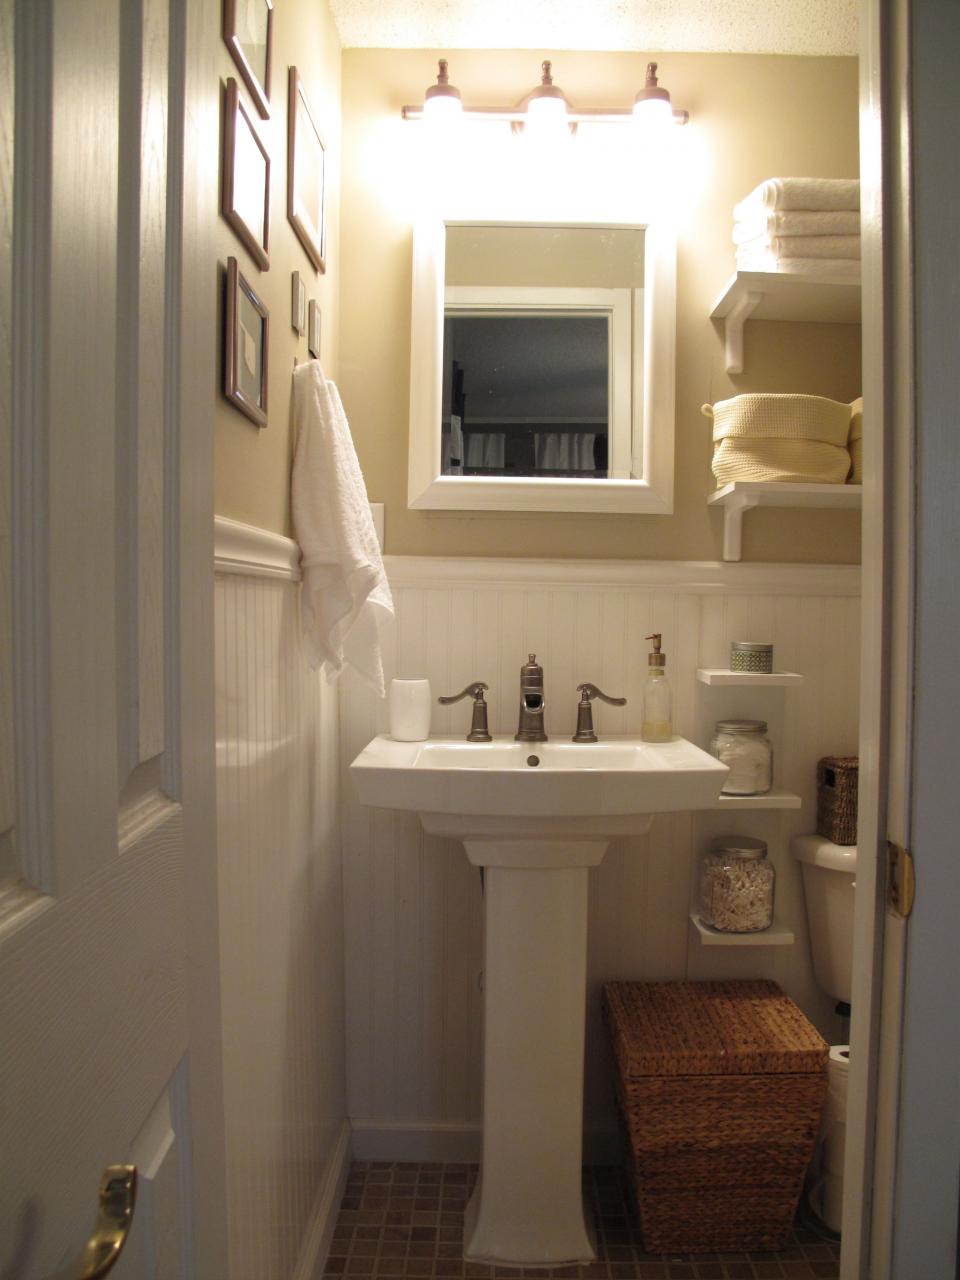 Unique A Simple Guide To Storage Ideas For Bathroom With Pedestal Sink